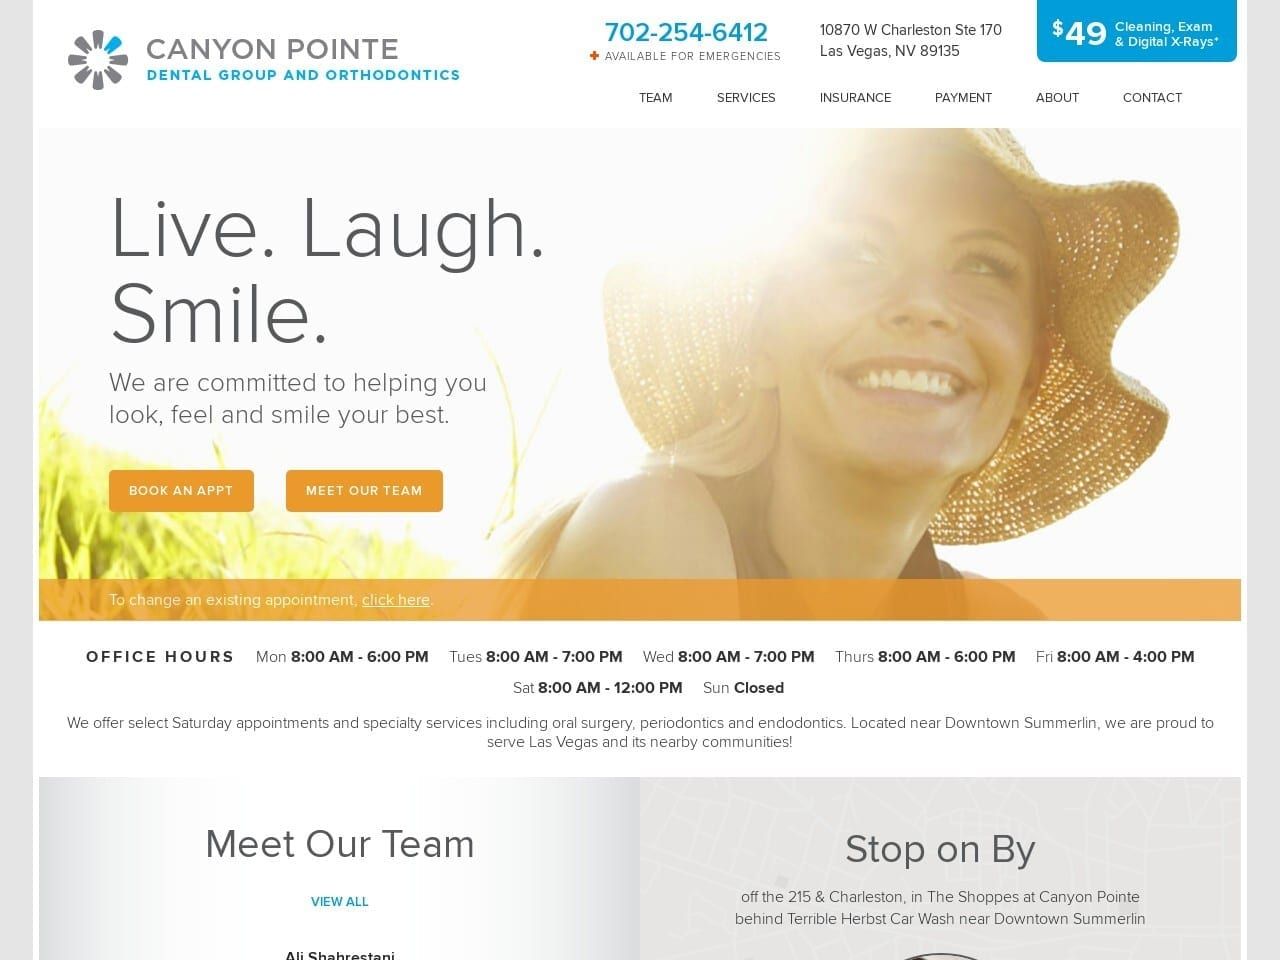 Canyon Pointe Dental Group Website Screenshot from canyonpointedentalgroup.com